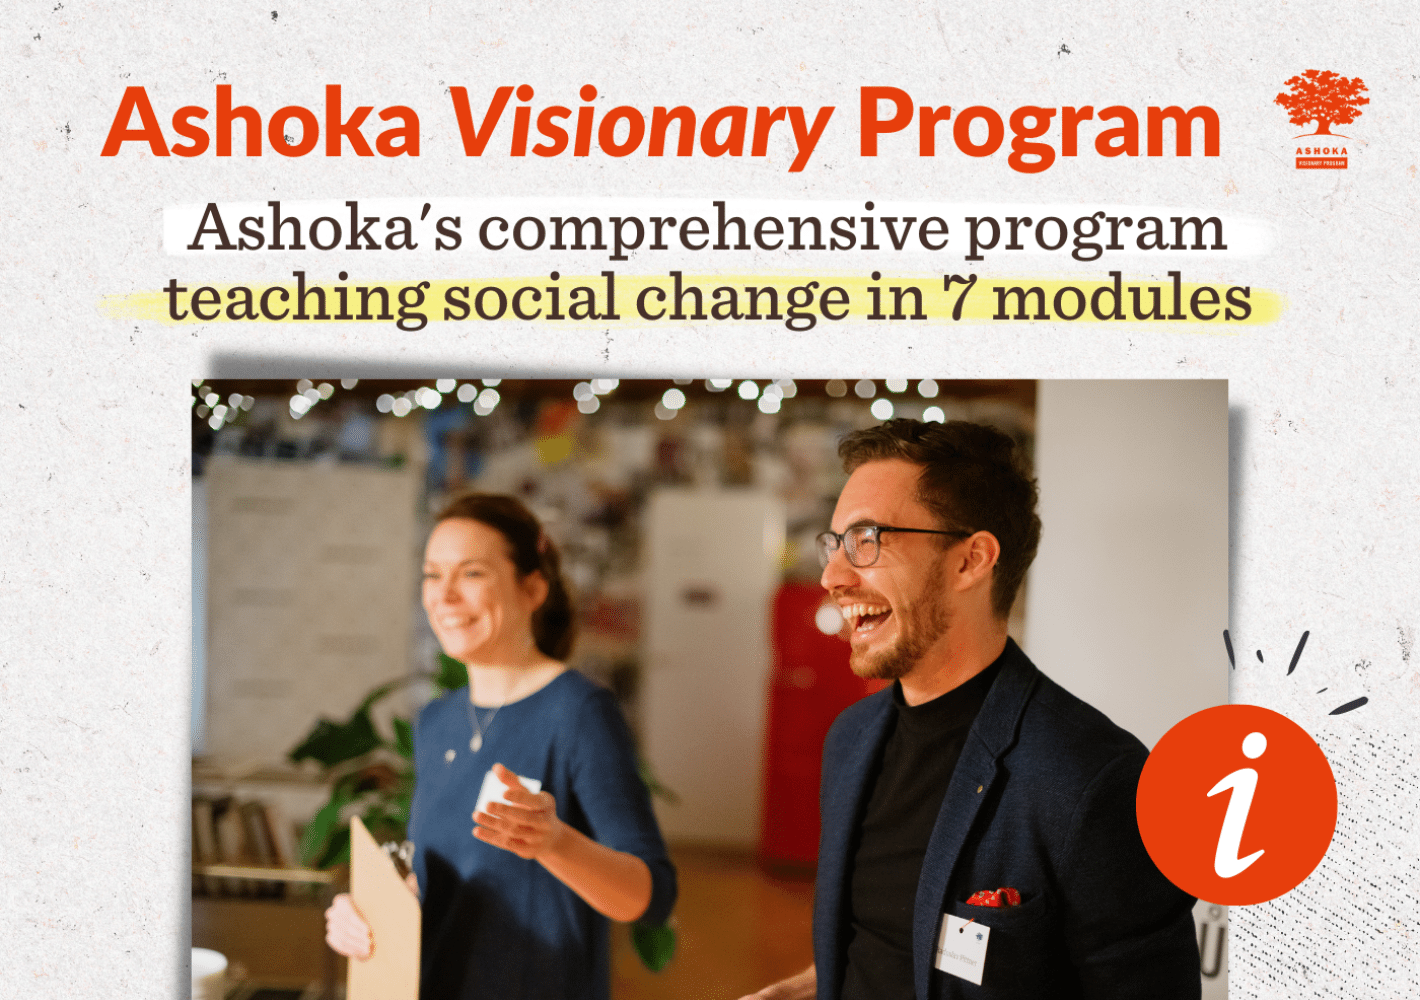 Photo of two energetic speakers, woman and man, looking towards the public. Text reading "Ashoka's comprehensive program teaching social change in 7 modules".